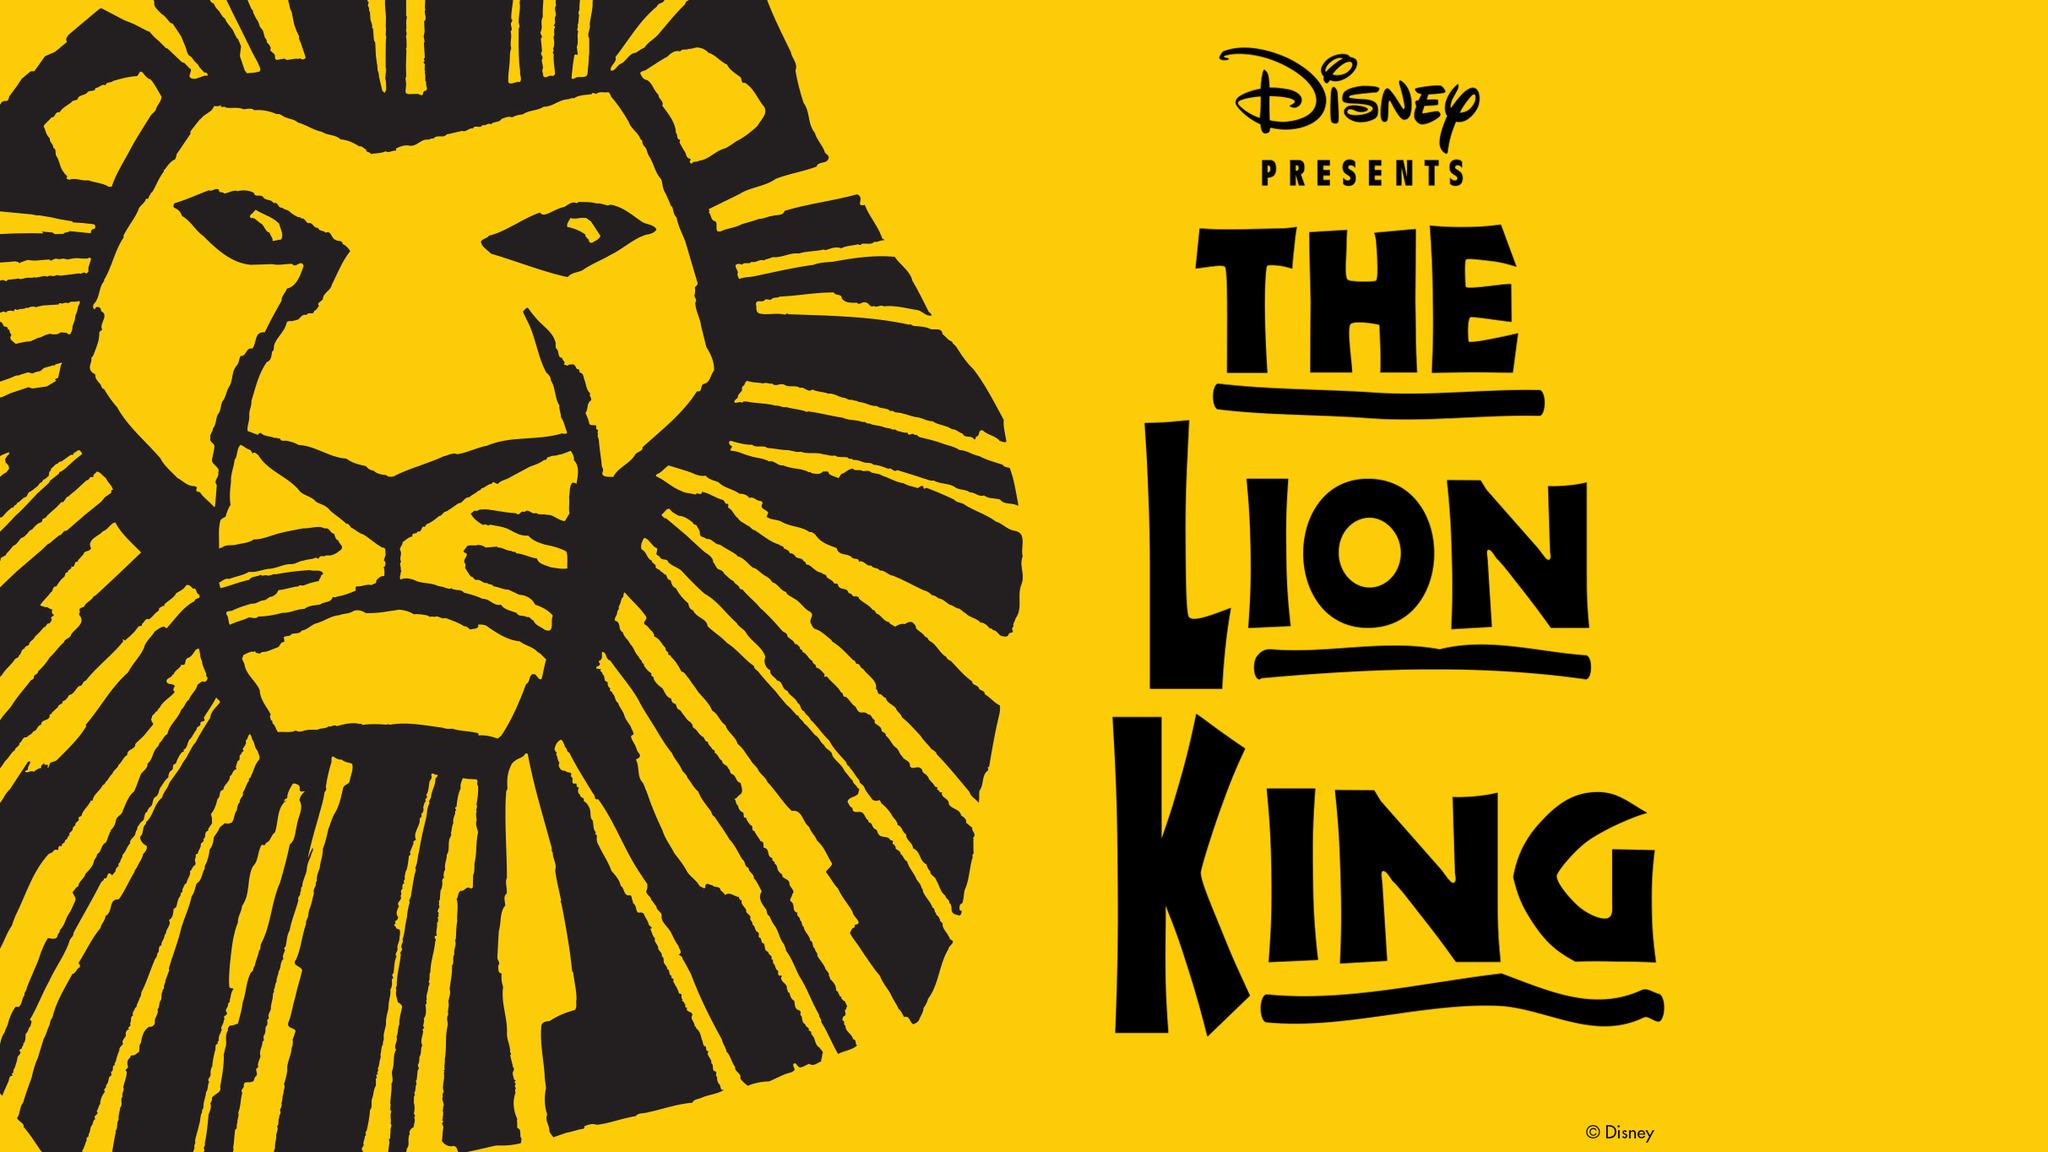 Disney Presents The Lion King (Chicago) Tickets | Event Dates ...